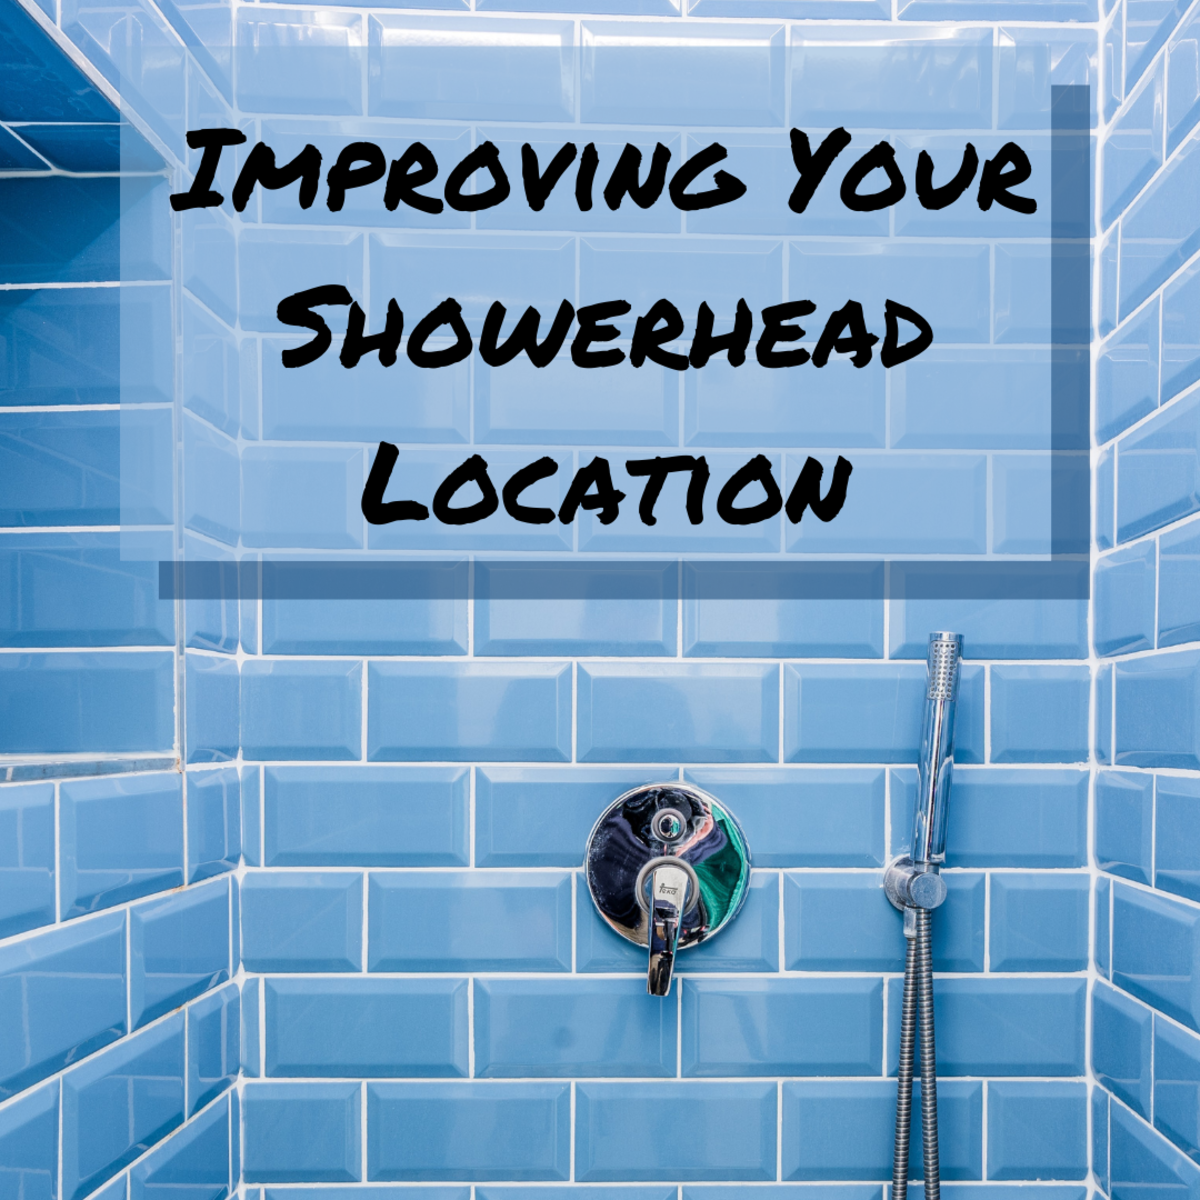 Learn how to fix your showerhead's location by raising or extending it